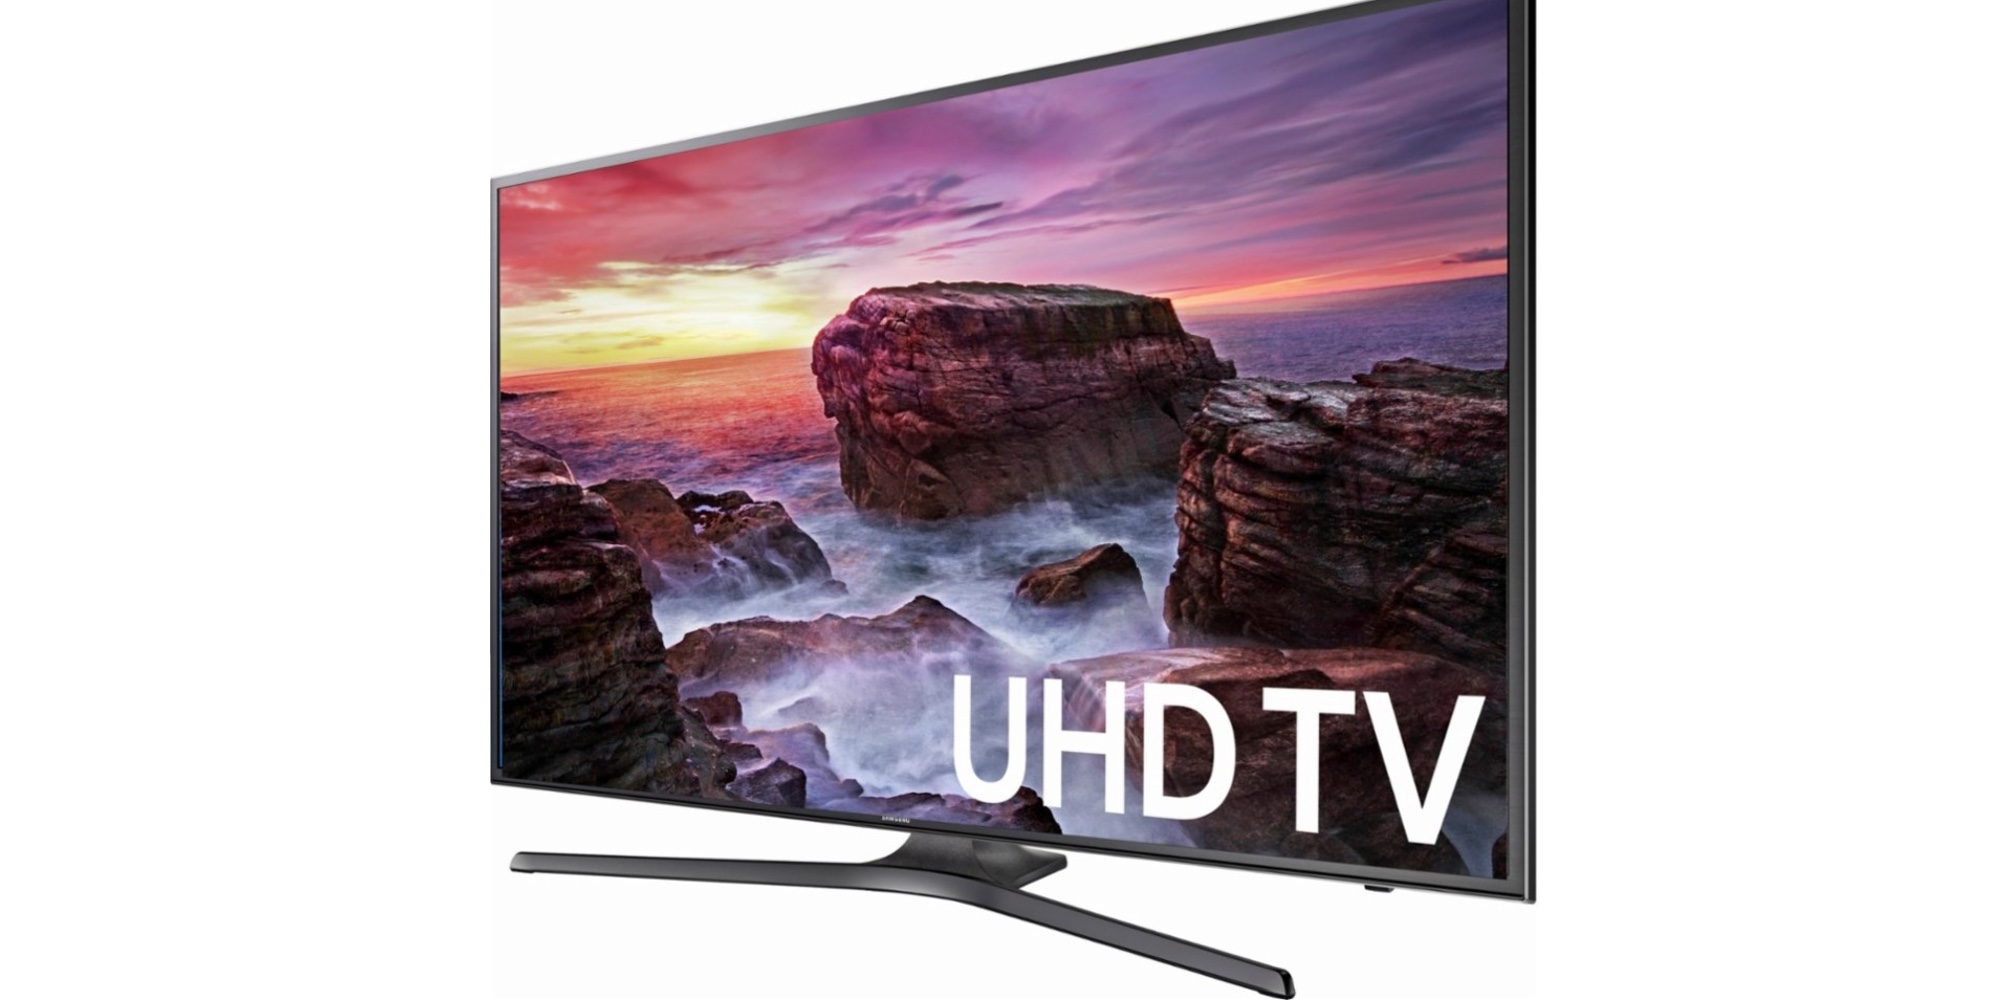 Samsung 4K Smart TVs on sale at Best Buy, today only 50inch for 430